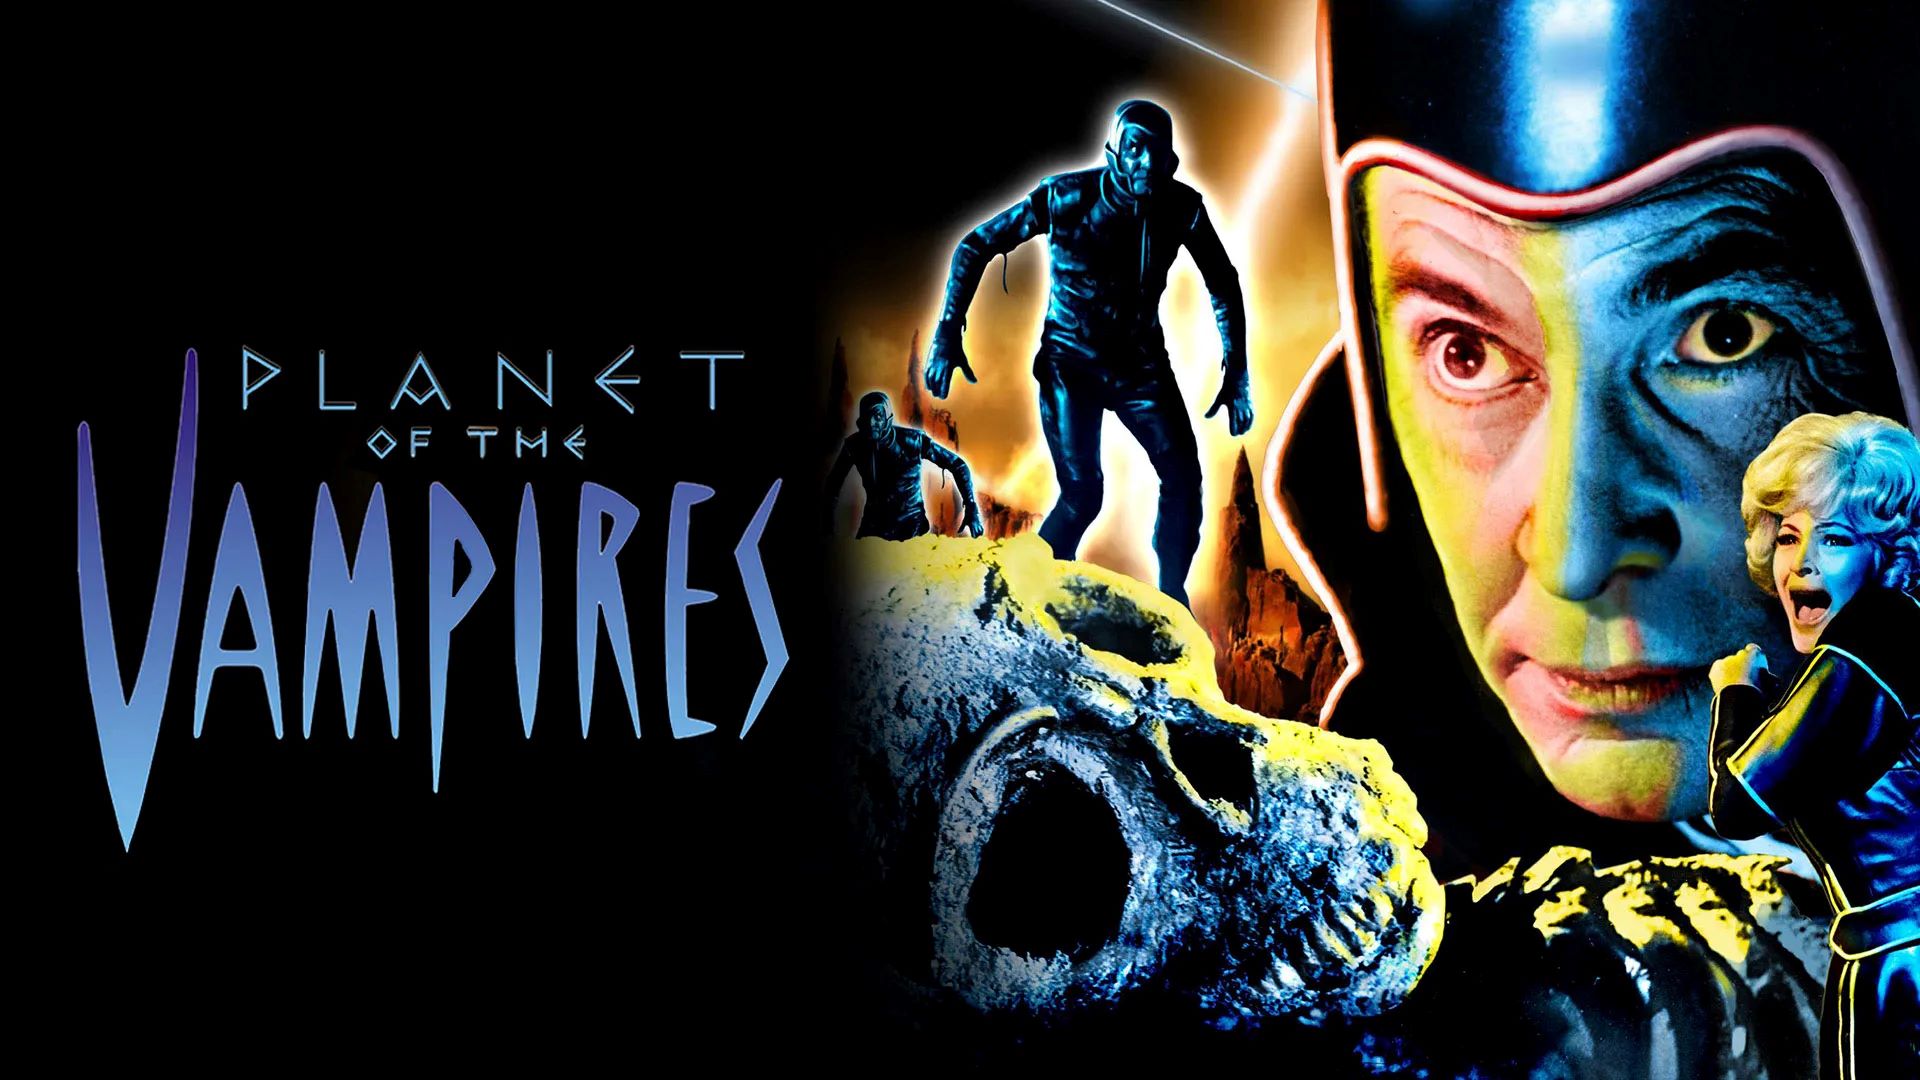 38-facts-about-the-movie-planet-of-the-vampires